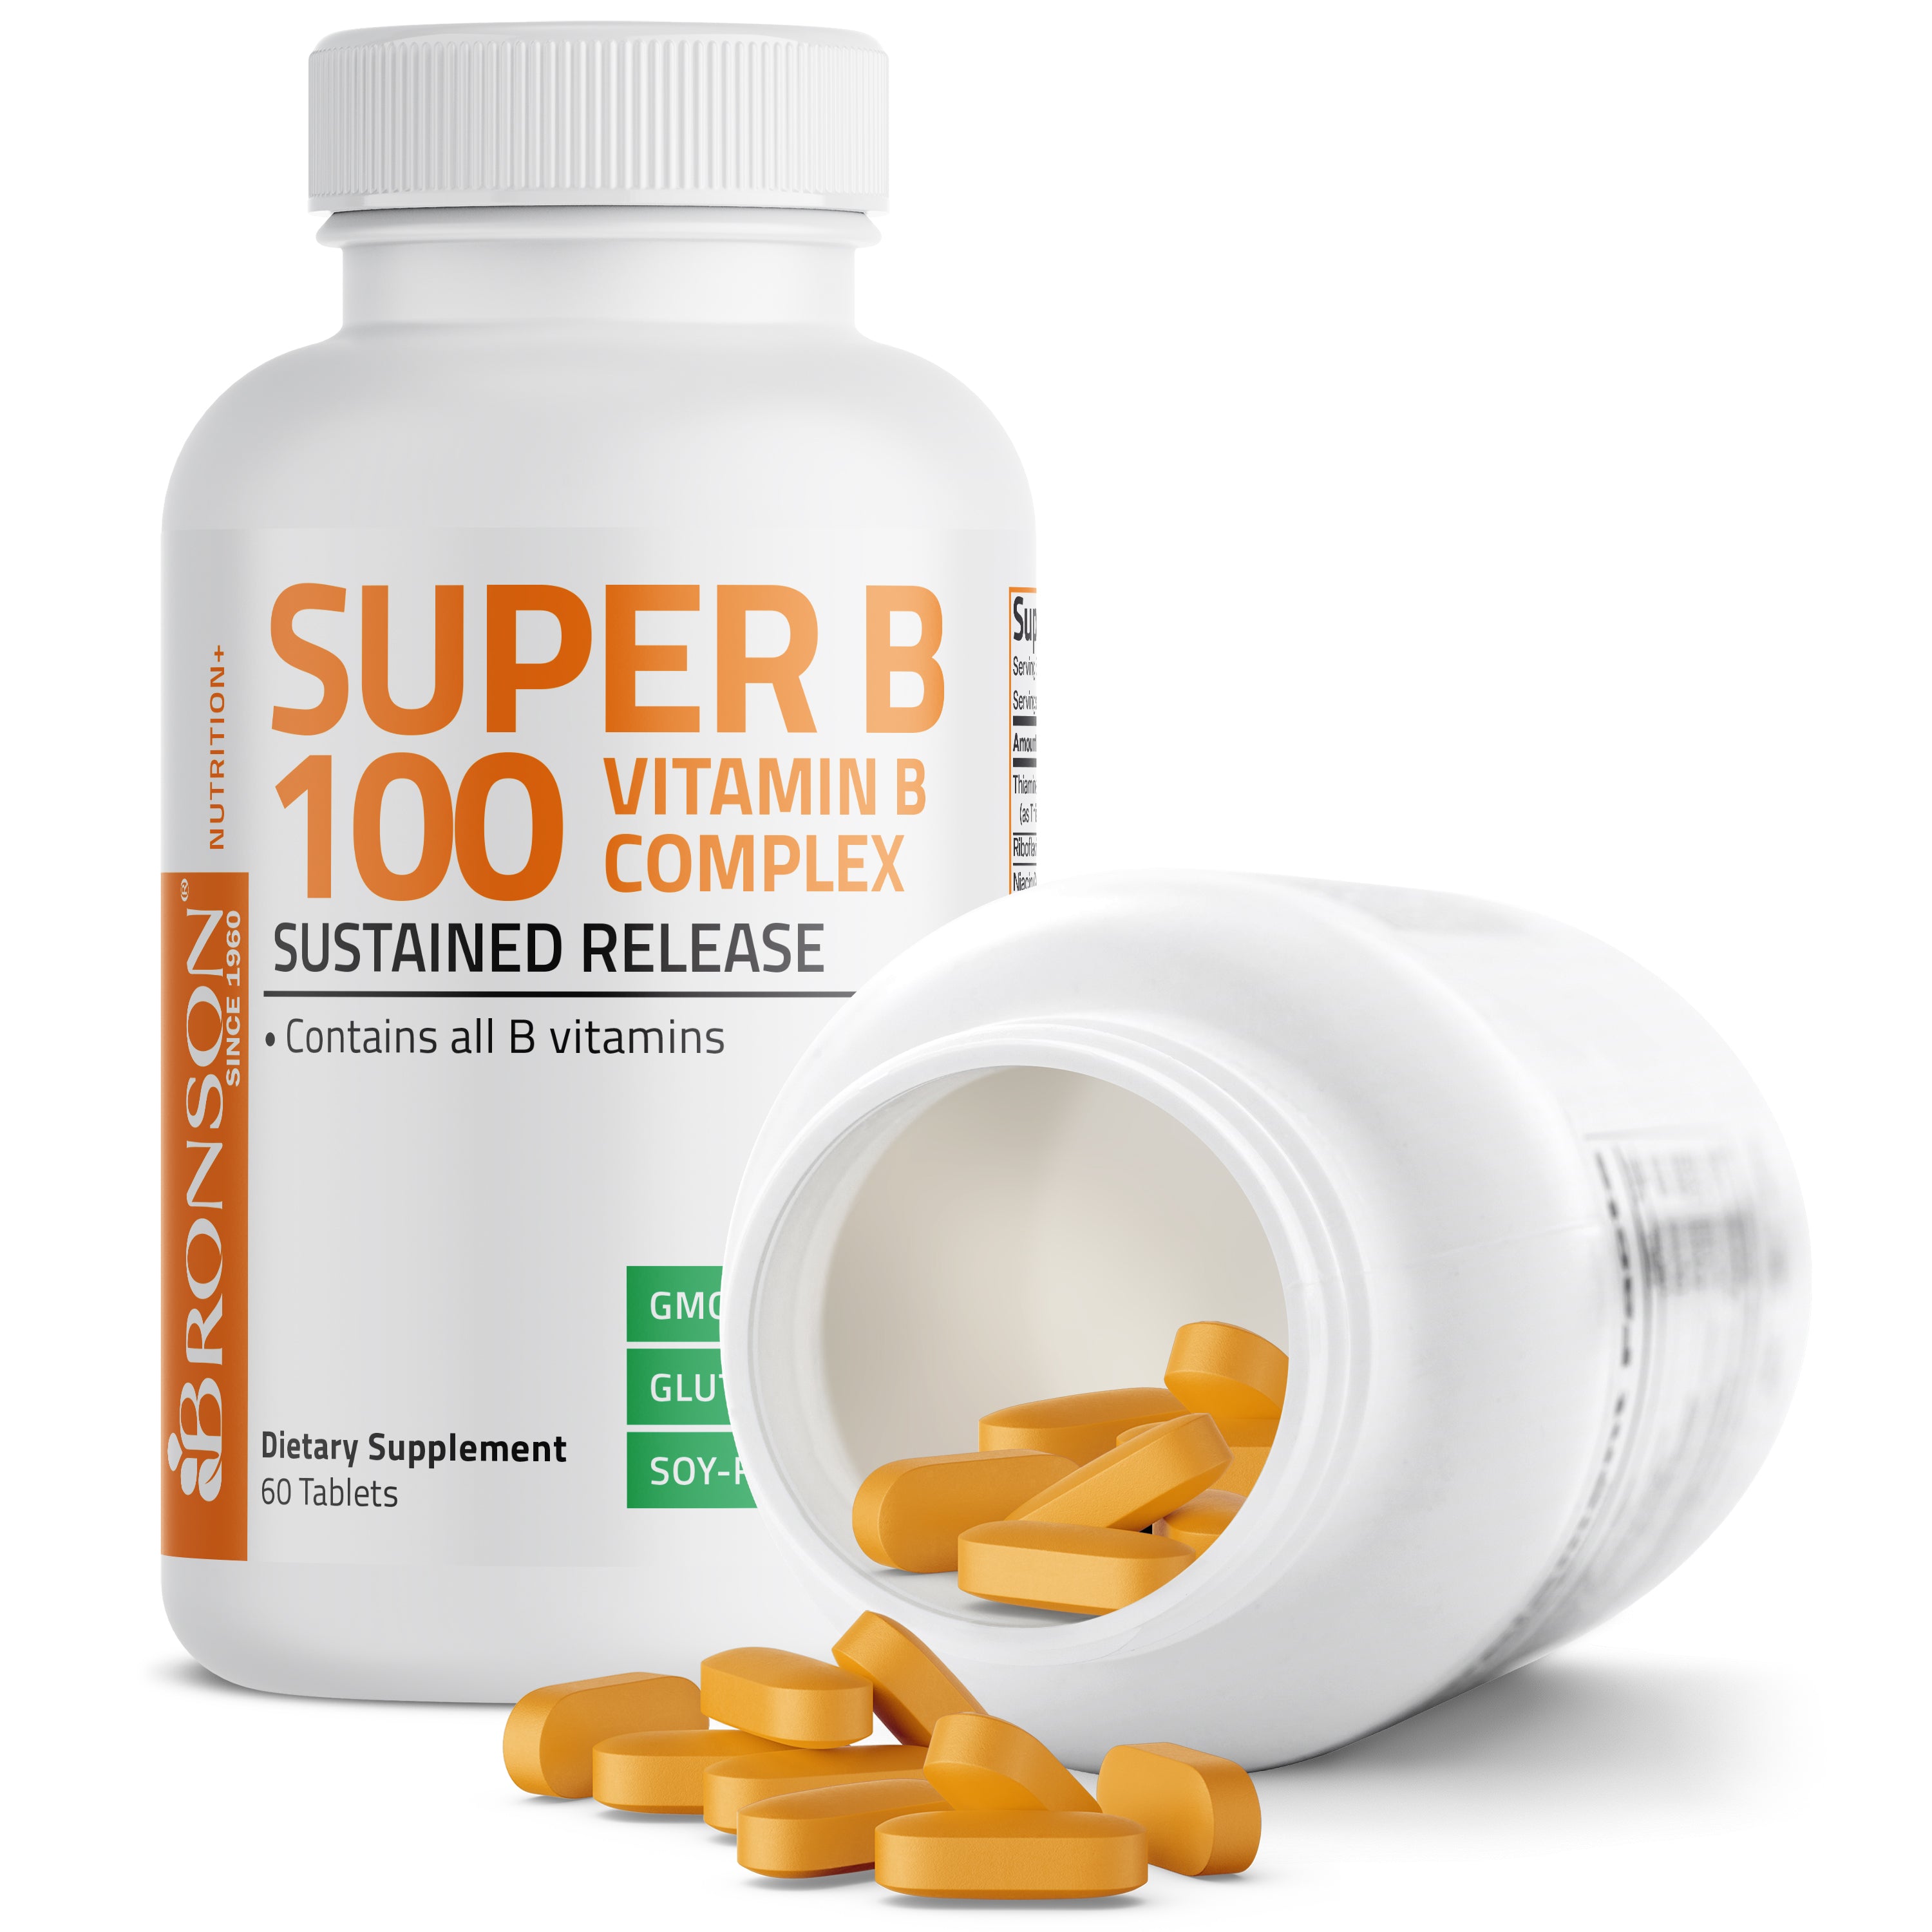 Super Vitamin B 100 Complex Sustained Release view 18 of 6